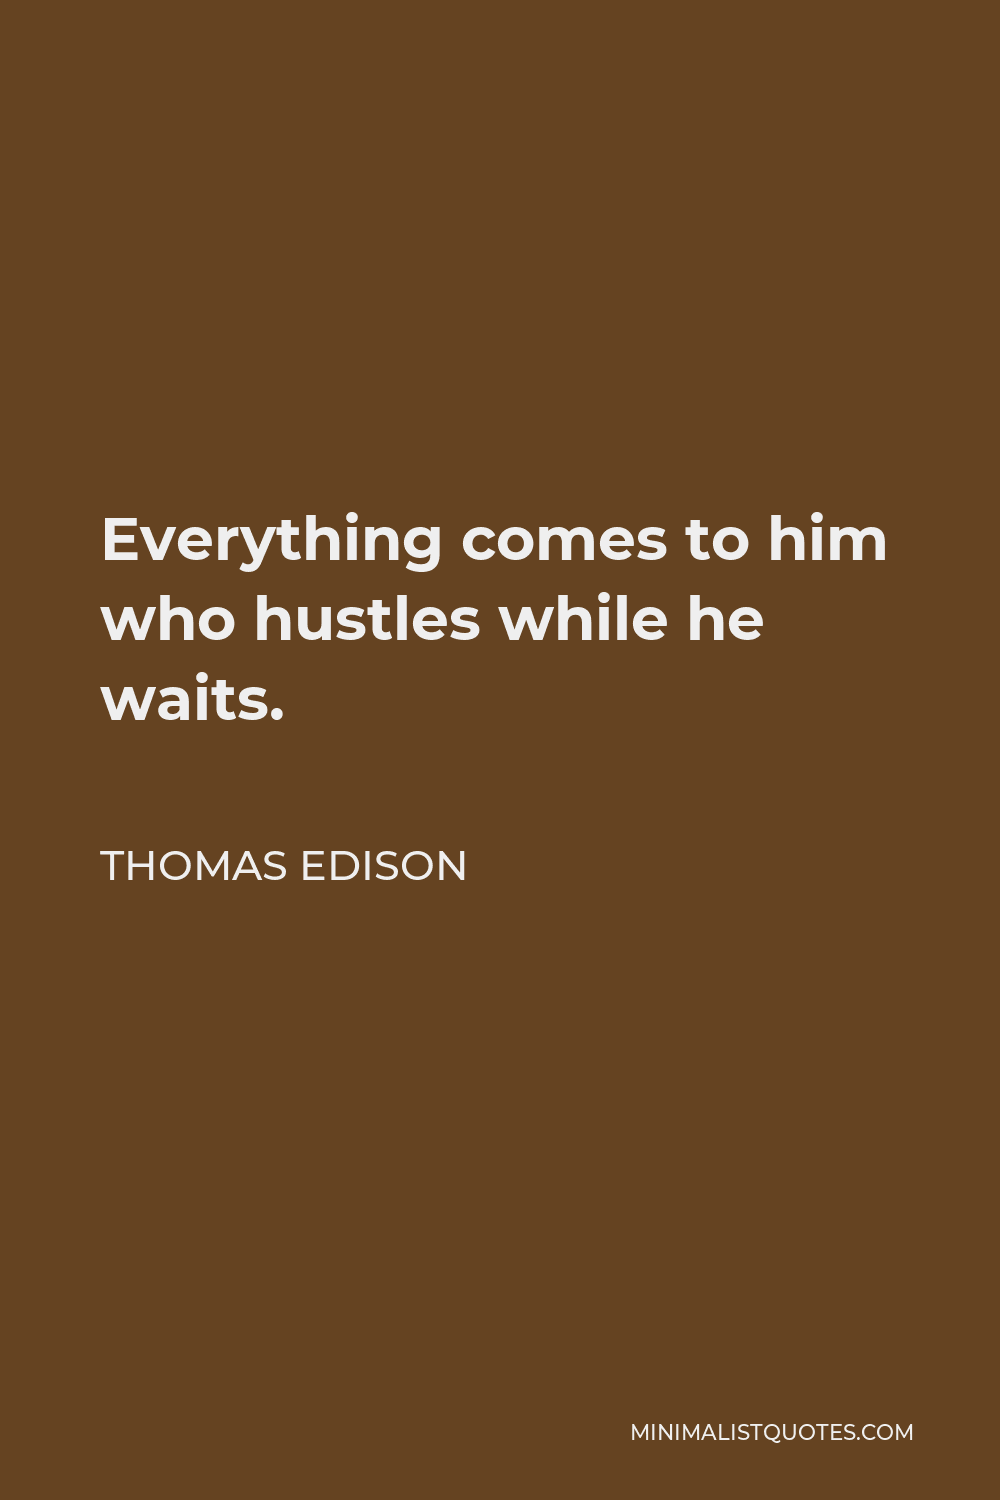 Thomas Edison Quote - Everything comes to him who hustles while he waits.